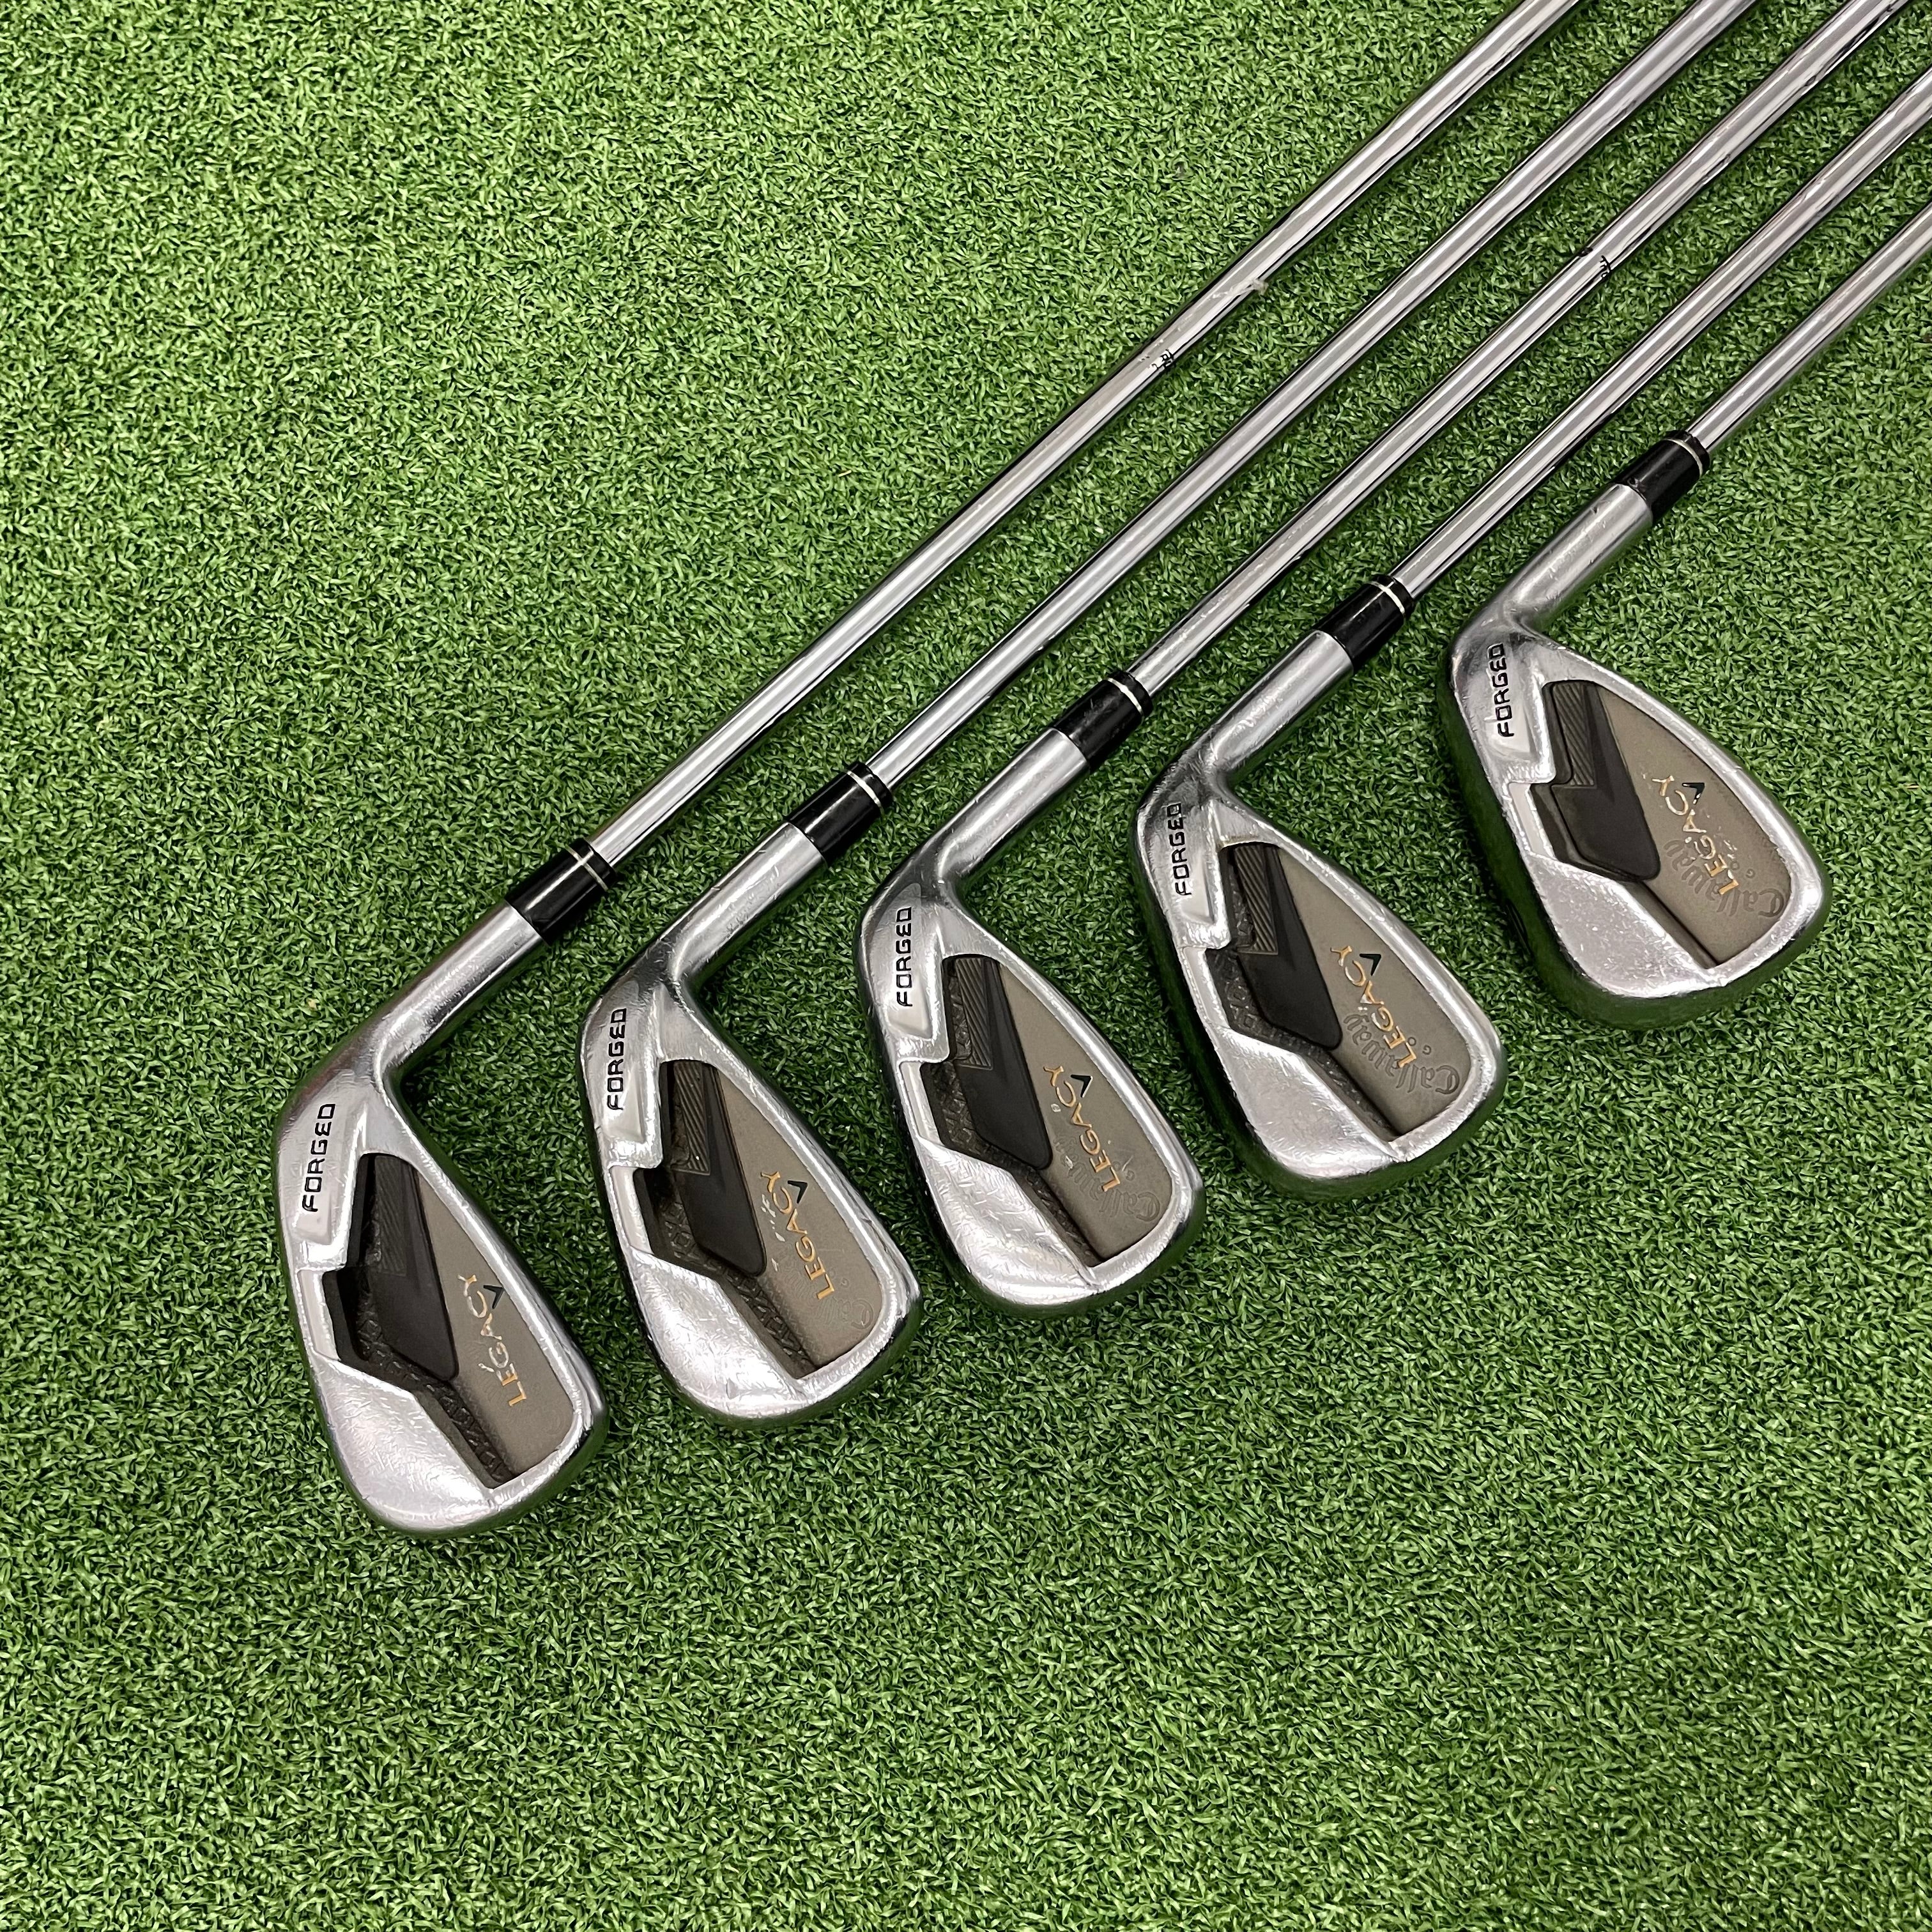 Callaway Legacy Forged IRON SET 5PC (6-P) STEEL SHAFTS (S200)